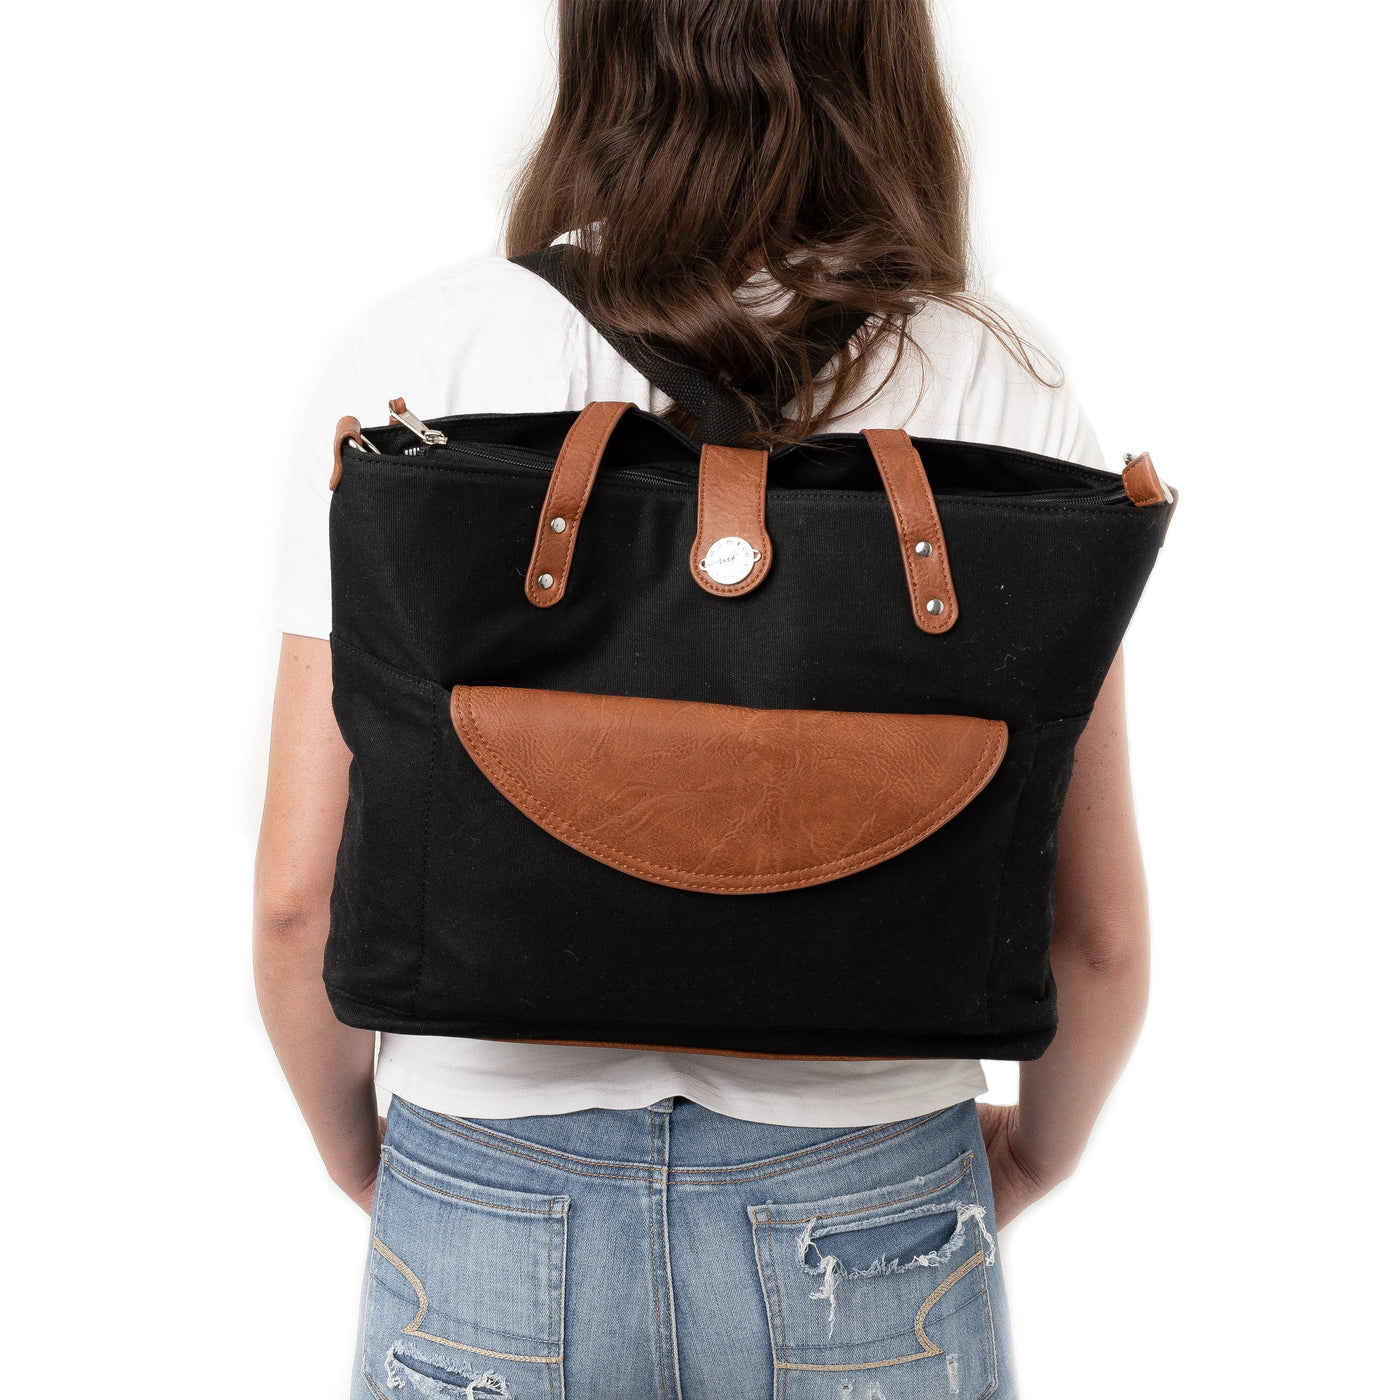 Mom in jeans and a white t-shirt standing backwards wearing a black tote as a backpack with brown vegan leather accents, all on a white background.